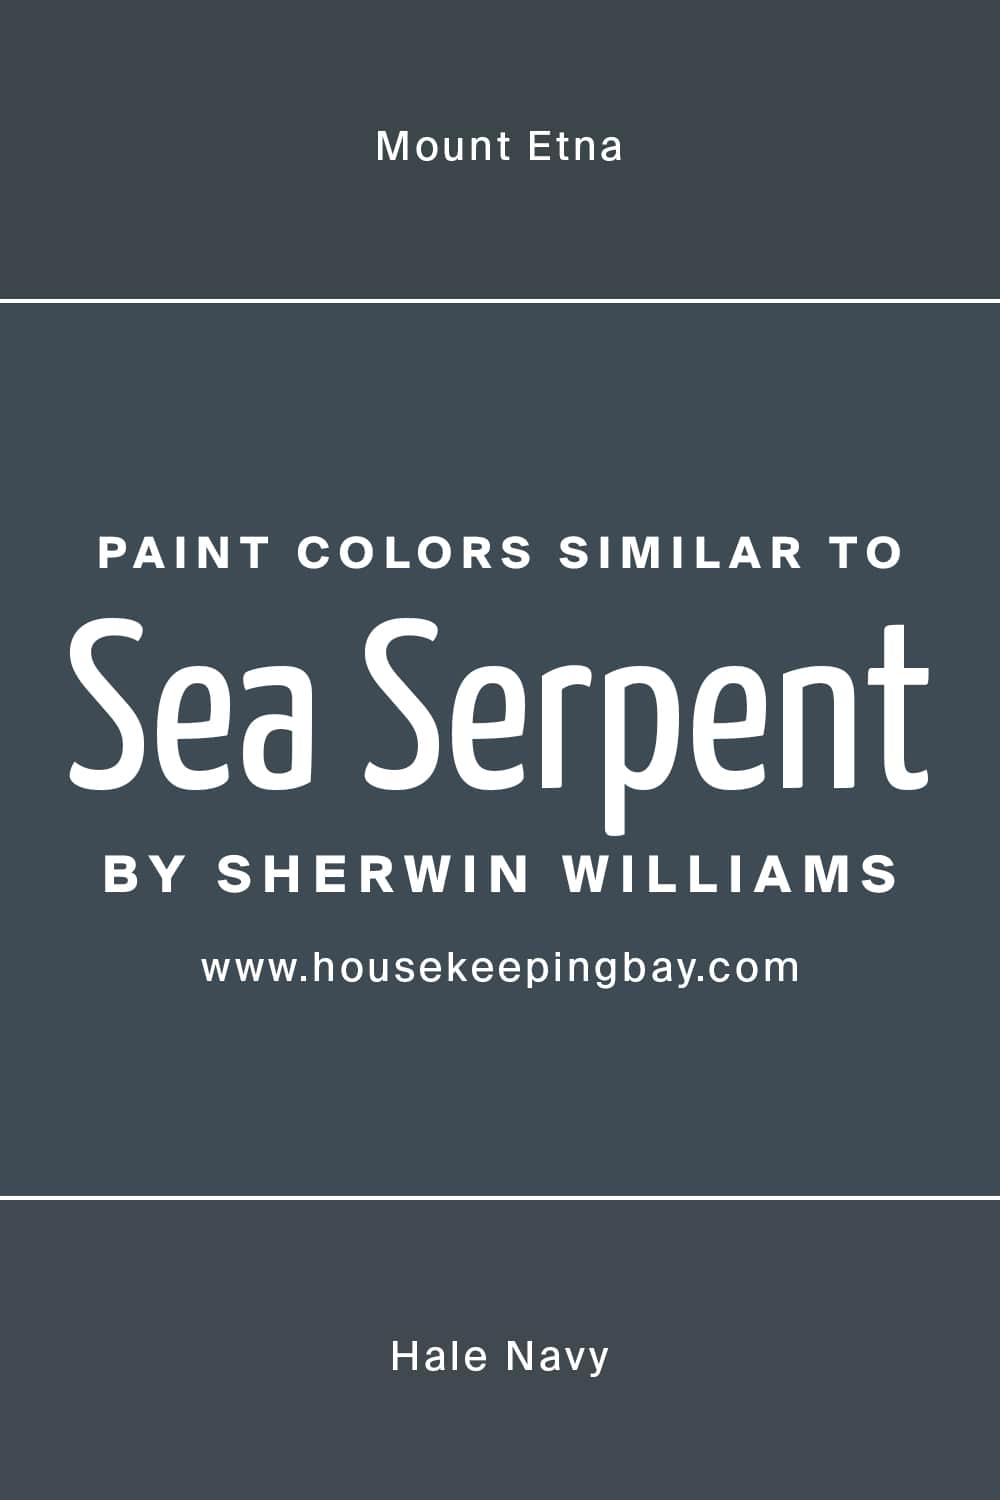 Paint Colors Similar to Sea Serpent by Sherwin Williams